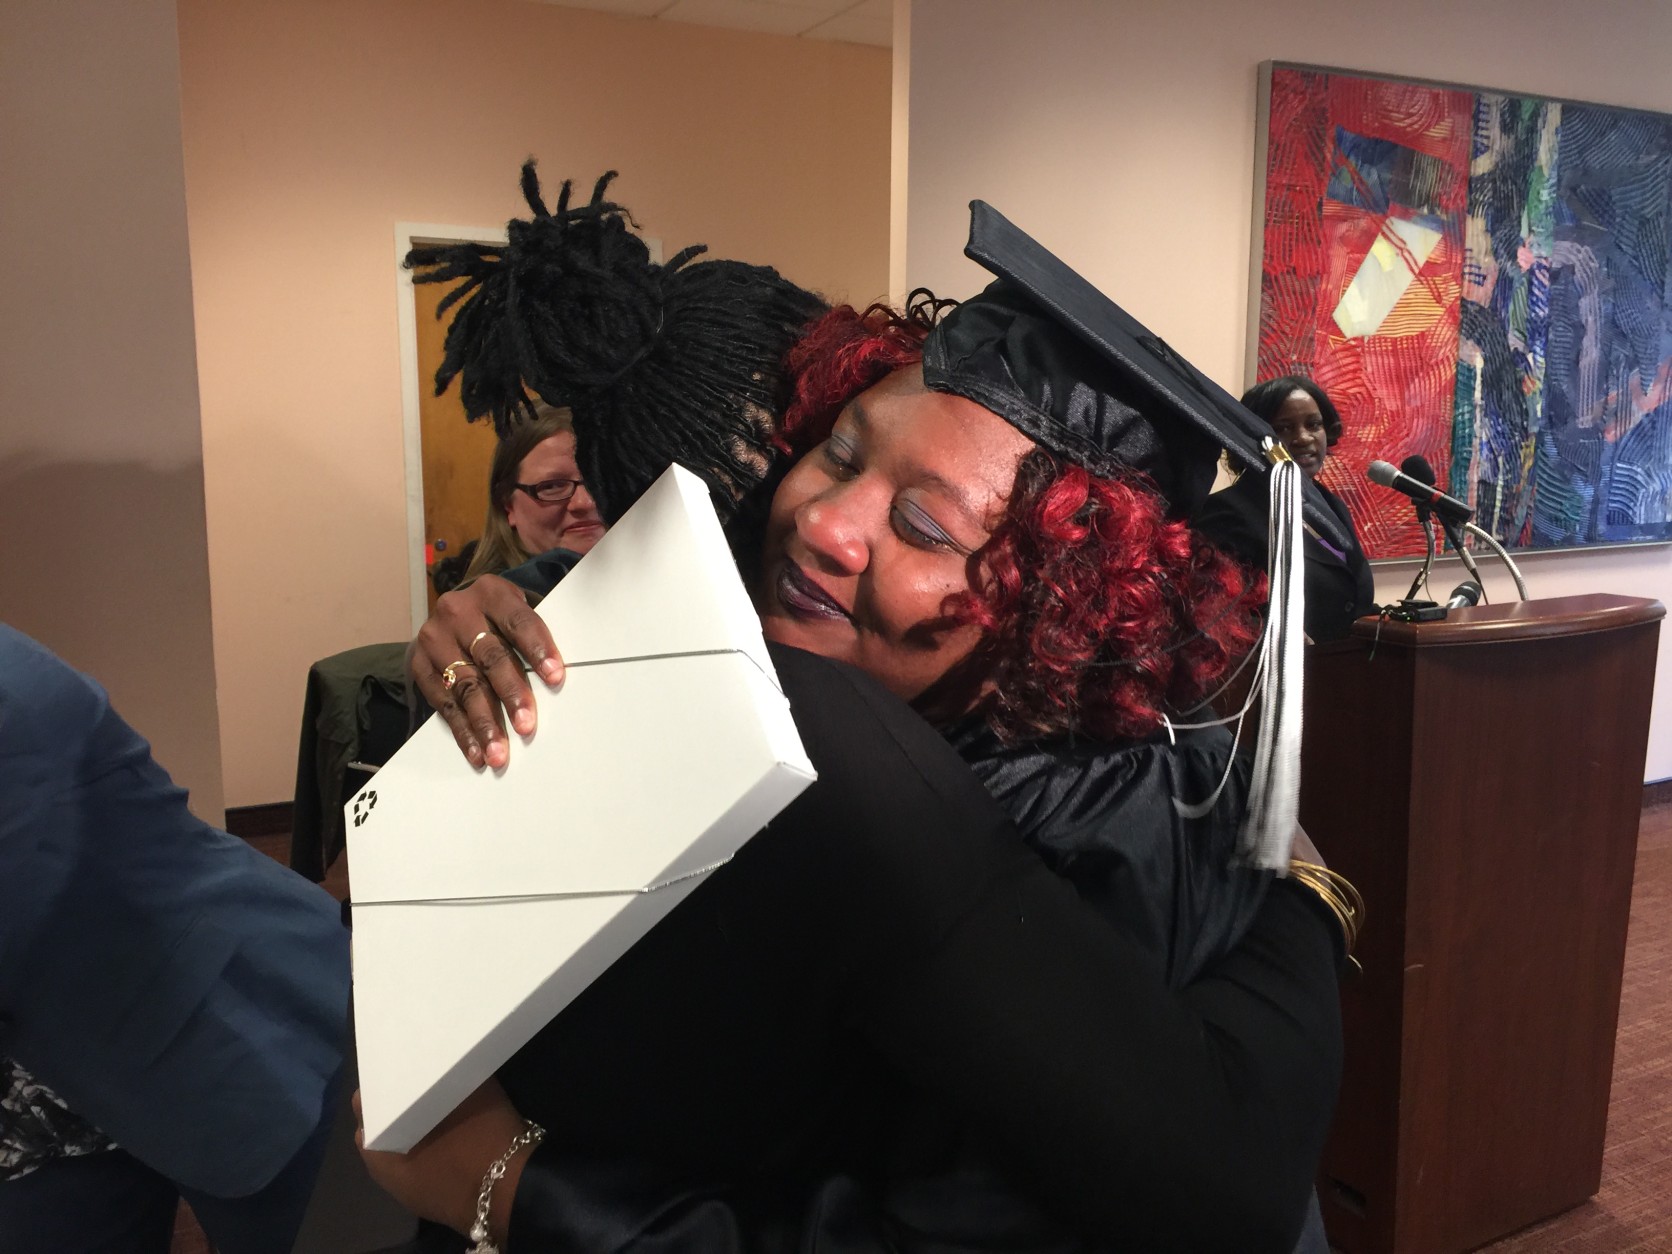 During the long process of undergoing the Family Treatment Court program, Tiffany Martin diligently attended meetings and fulfilled program requirements while homeless. She now lives in an apartment with her two children. (WTOP/Kristi King) 